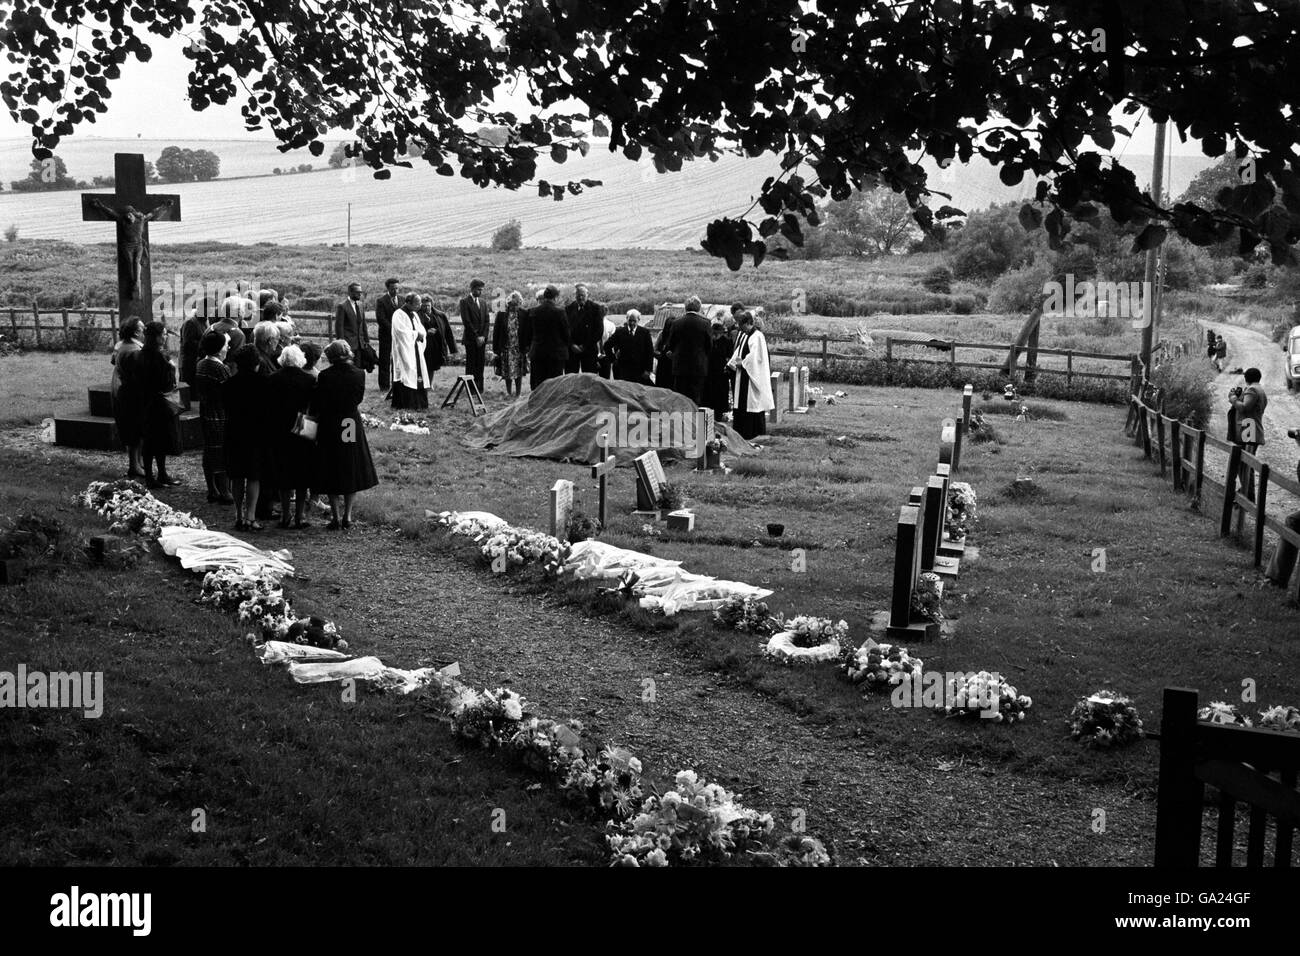 Mourners gather at the graveside of Hungerford massacre victim Eric Vardy during the funeral service at Great Shefford, near Hungerford. Stock Photo